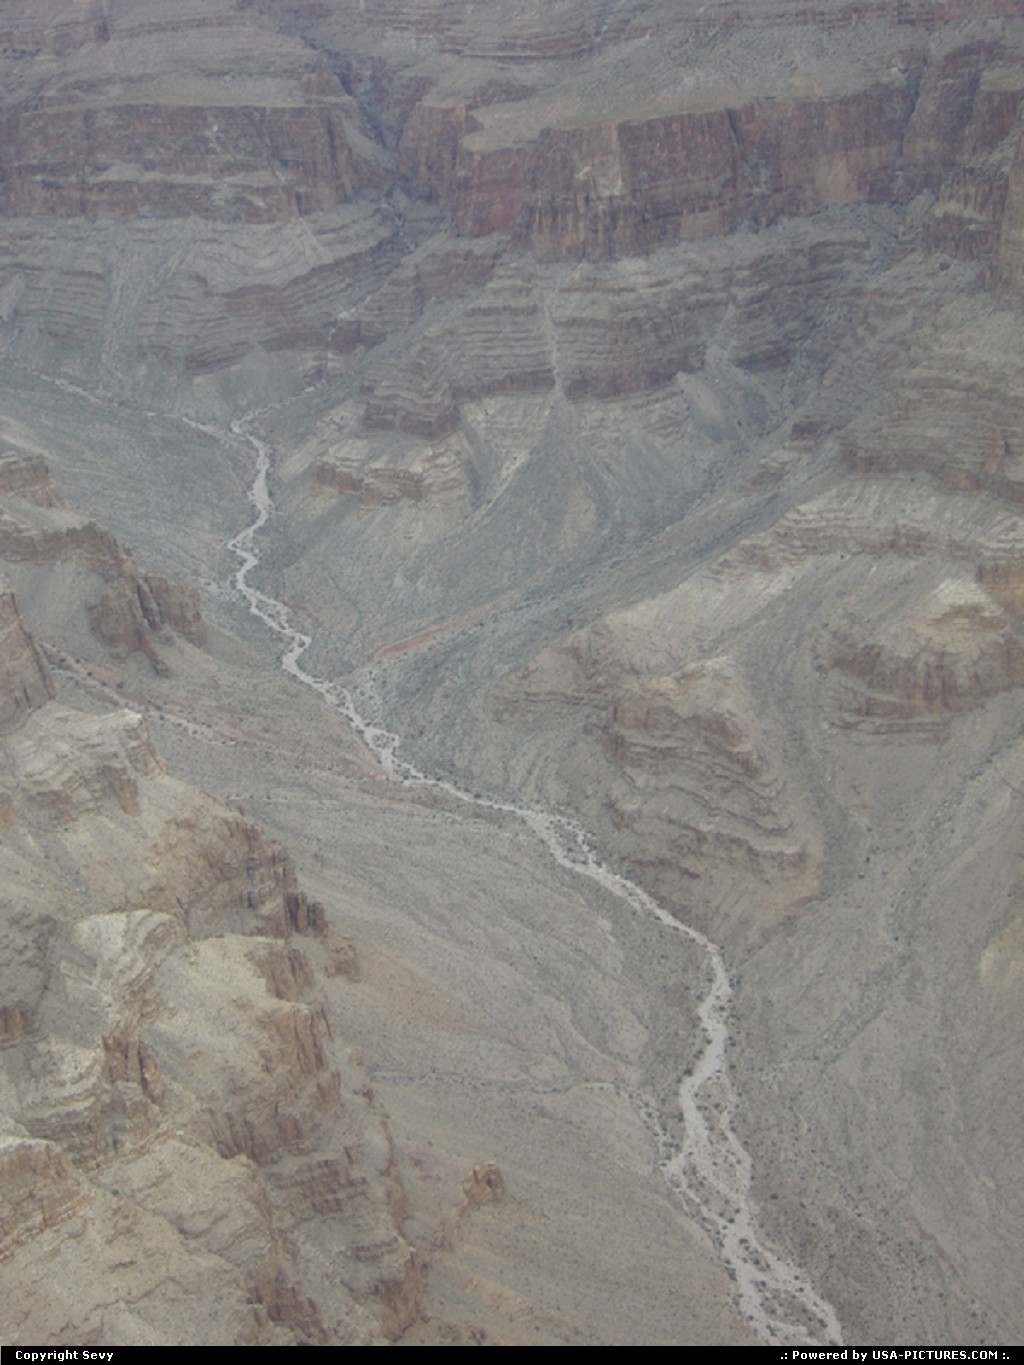 Picture by Sevy: Grand Canyon Arizona   